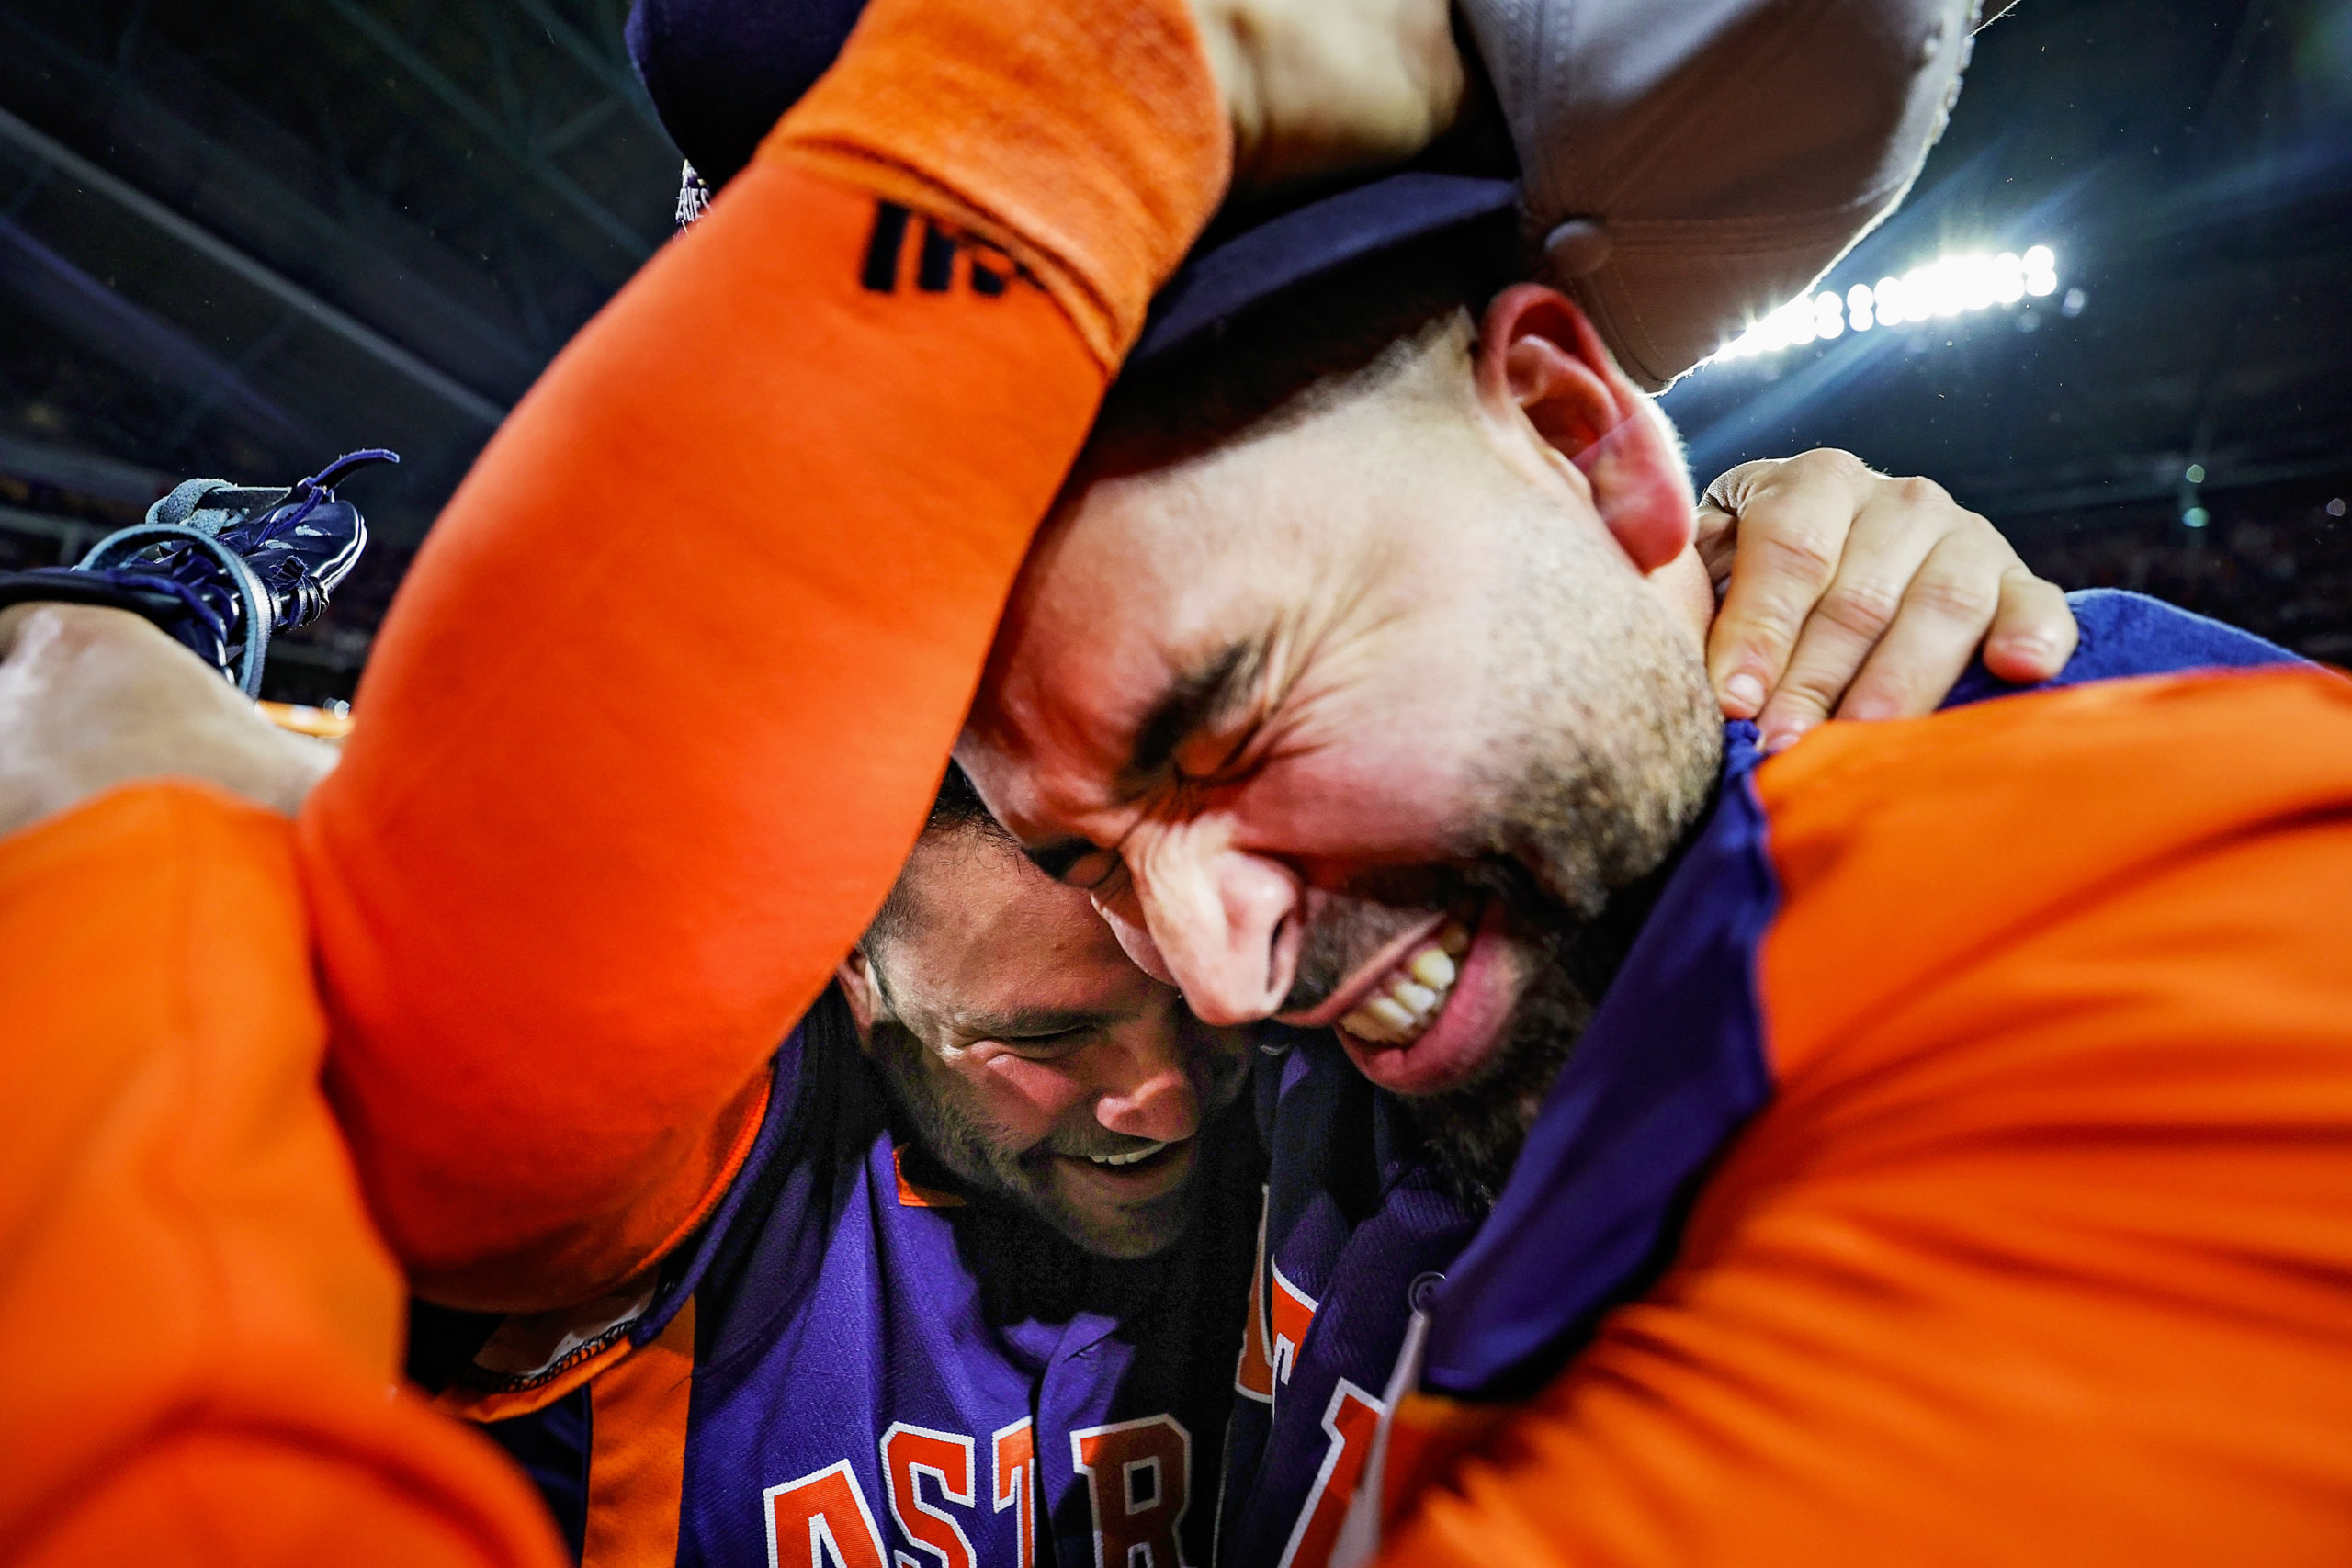 HOUSTON, TEXAS - NOVEMBER 05: Jose Altuve #27 and Jose Urquidy #65 of the Houston Astros embrace after defeating the Philadelphia Phillies to win the World Series in Game Six at Minute Maid Park on November 05, 2022 in Houston, Texas. Carmen Mandato/Getty Images